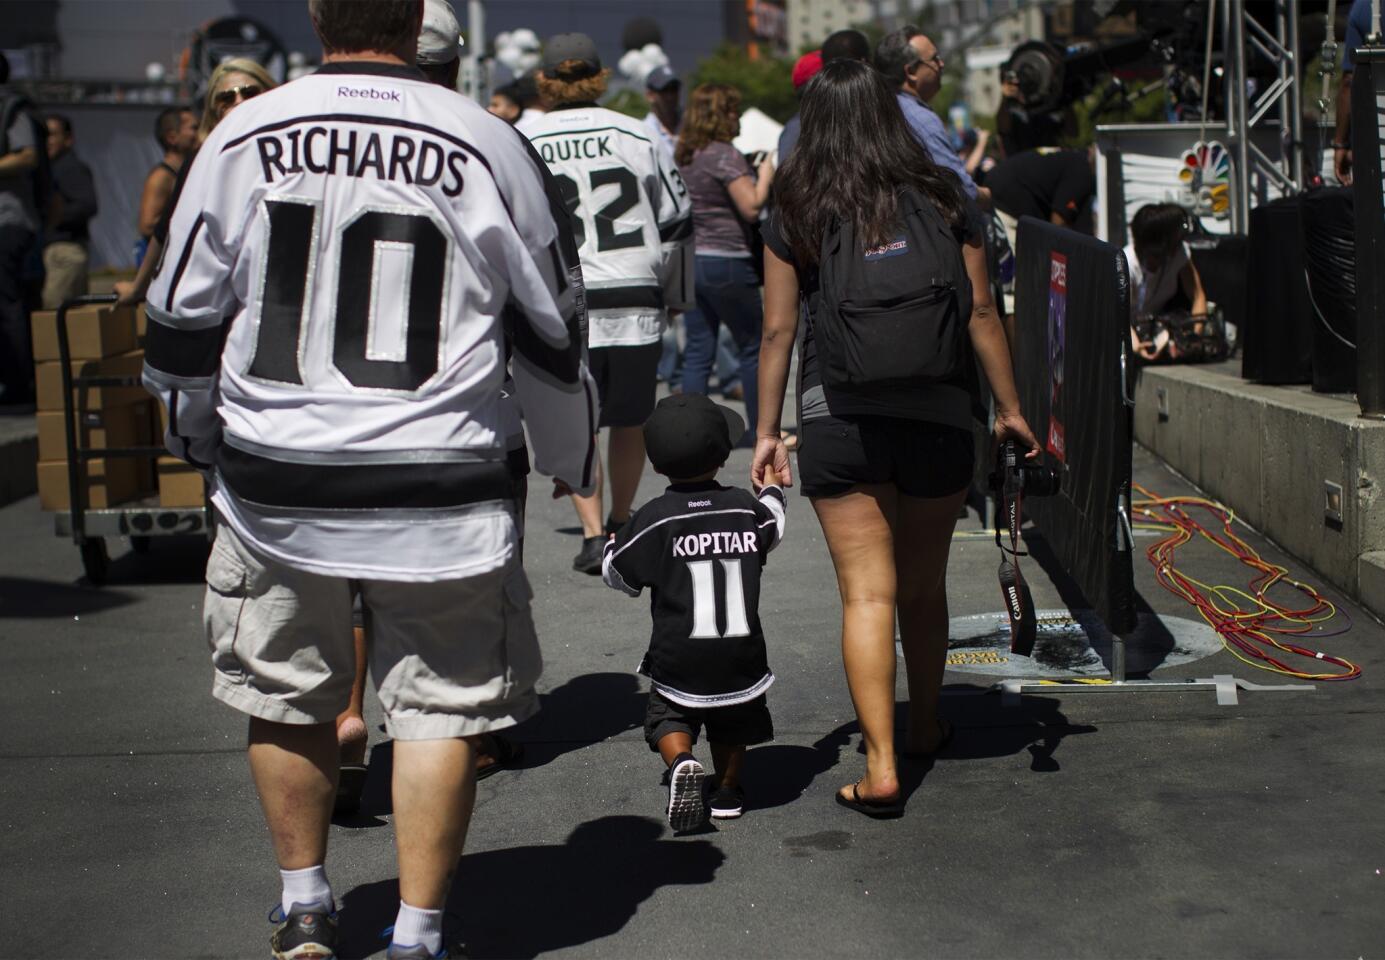 Kings fans young and old